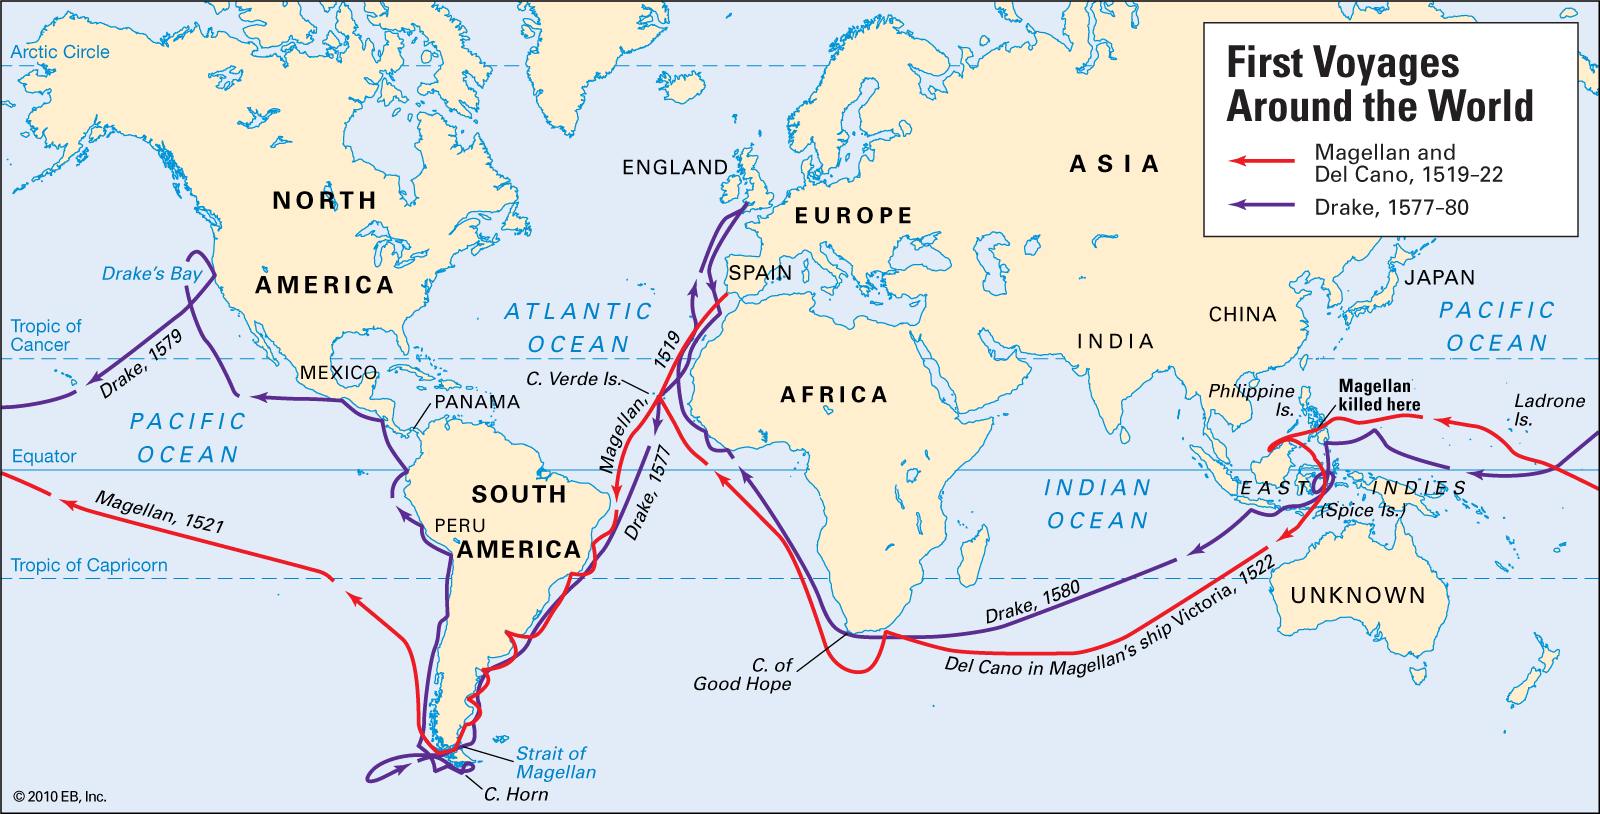 Different sea routes